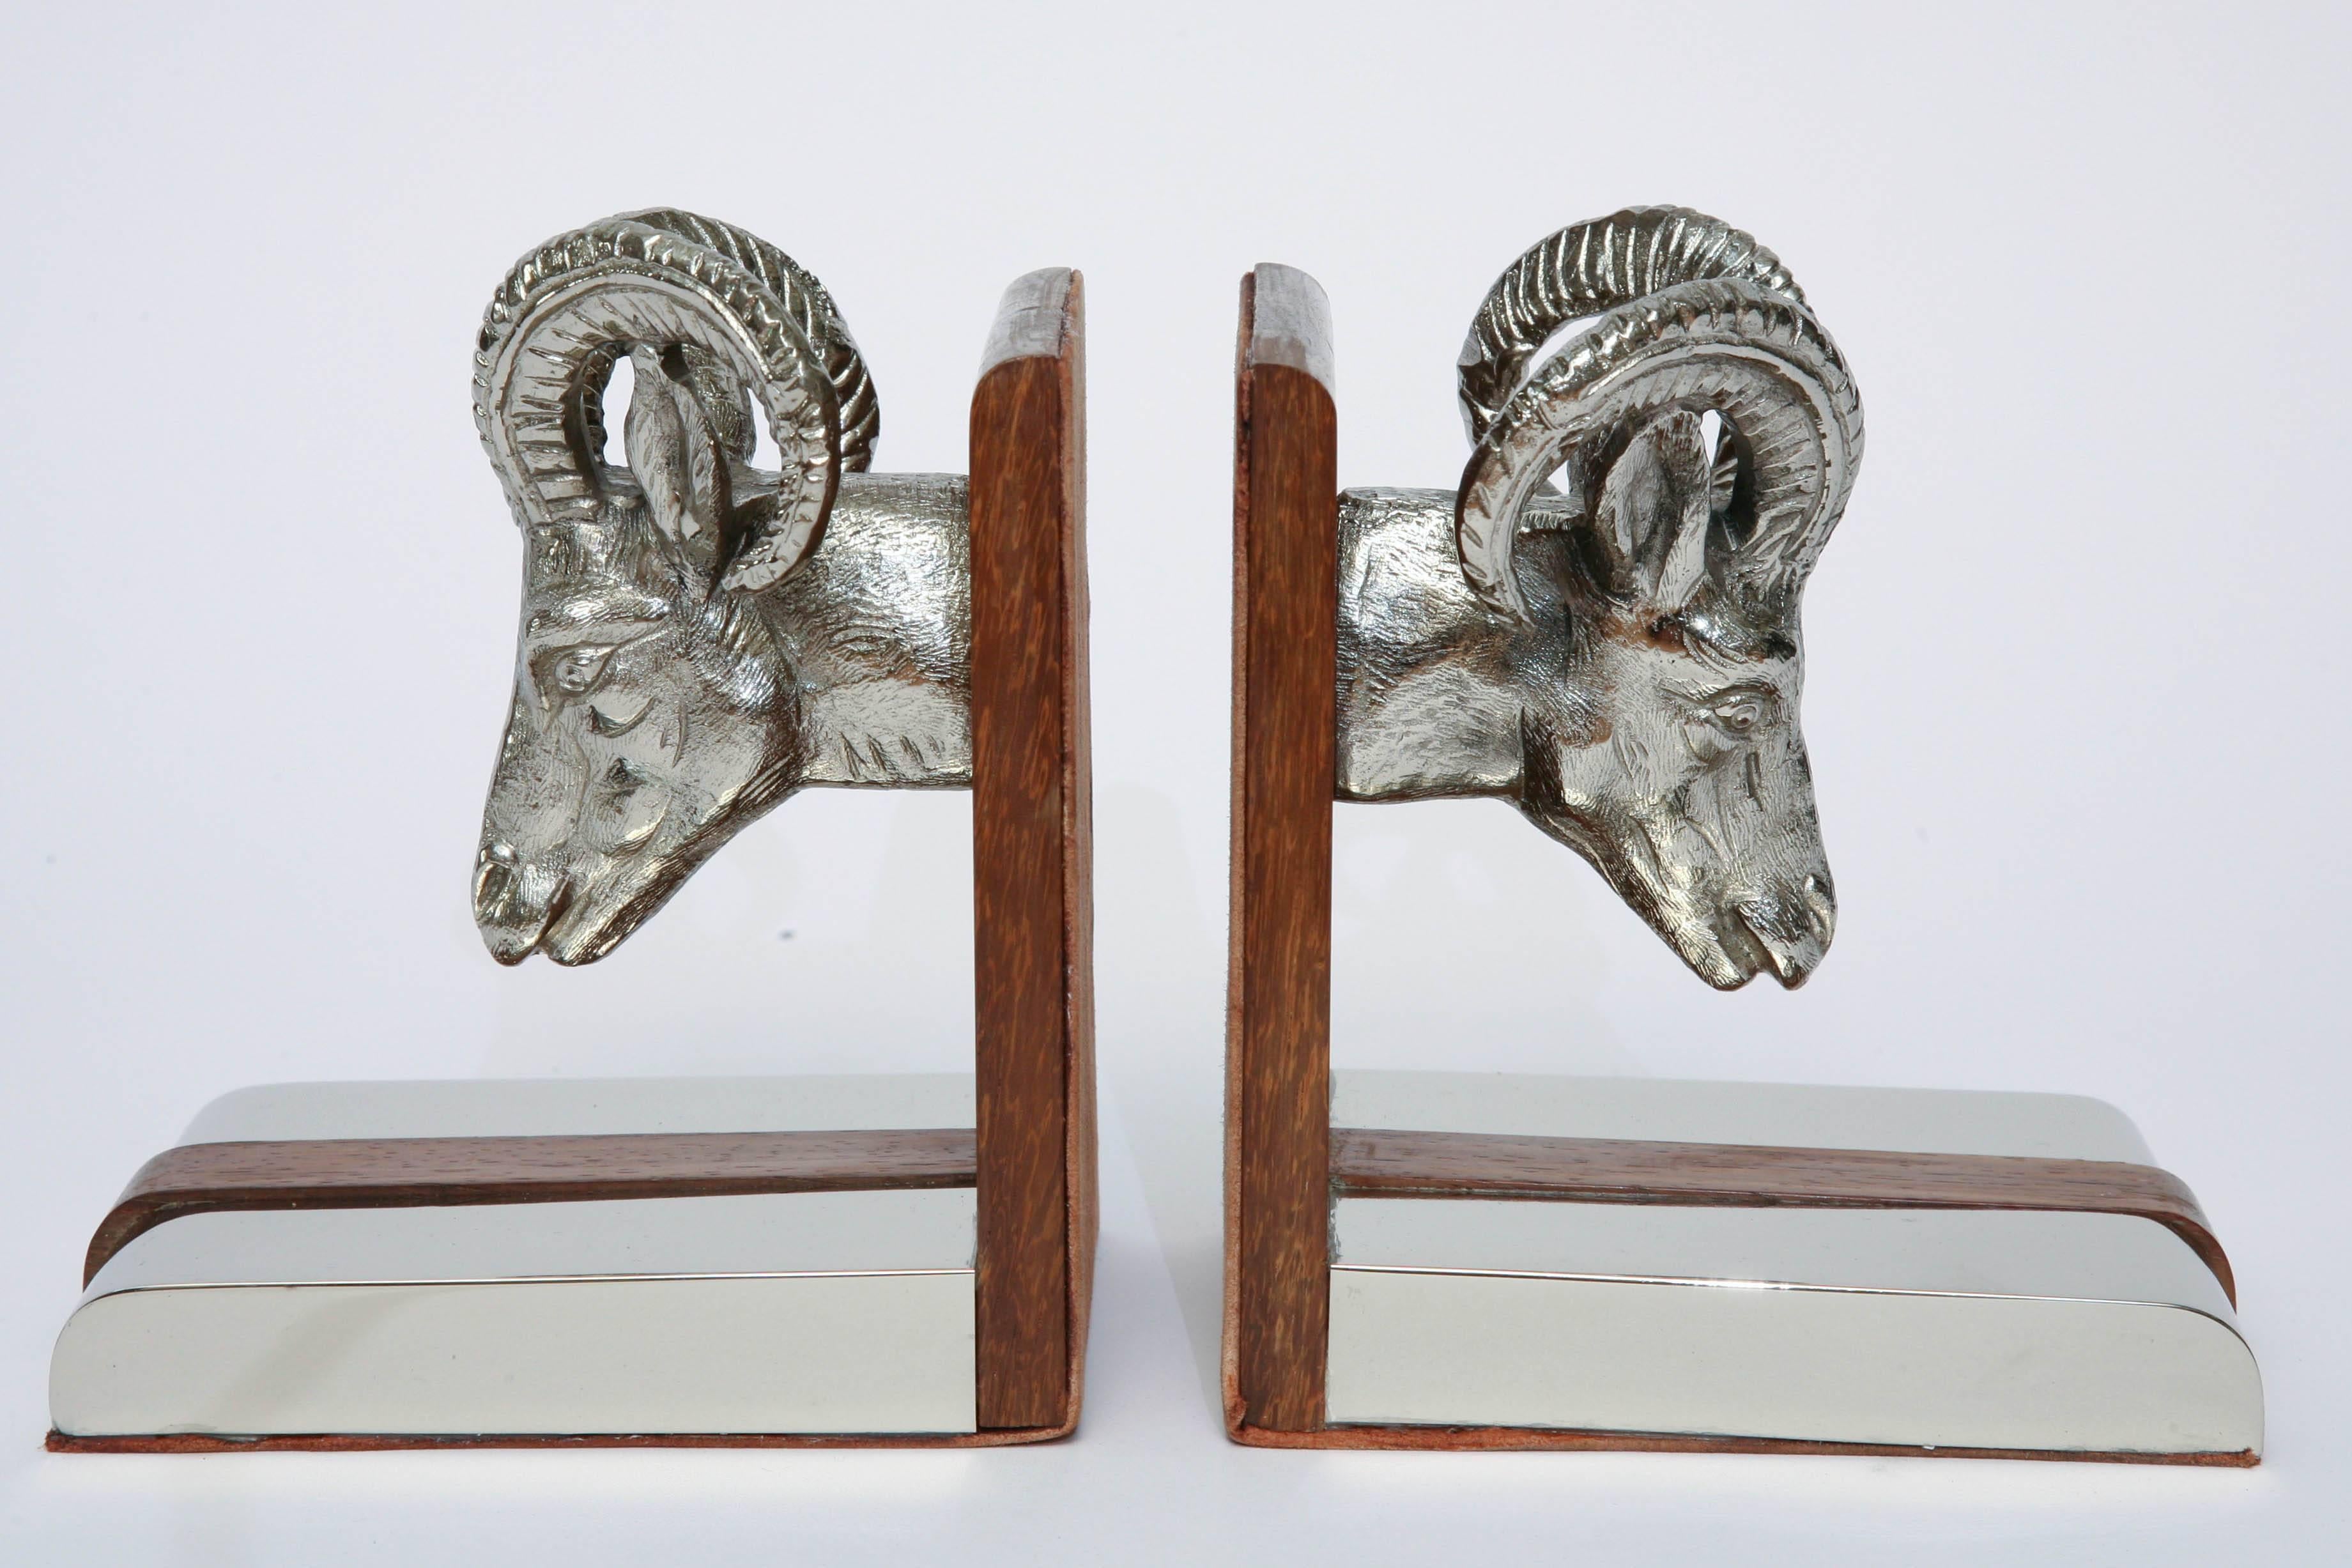 Striking pair of chrome and wood ram's heads bookends by Gucci.